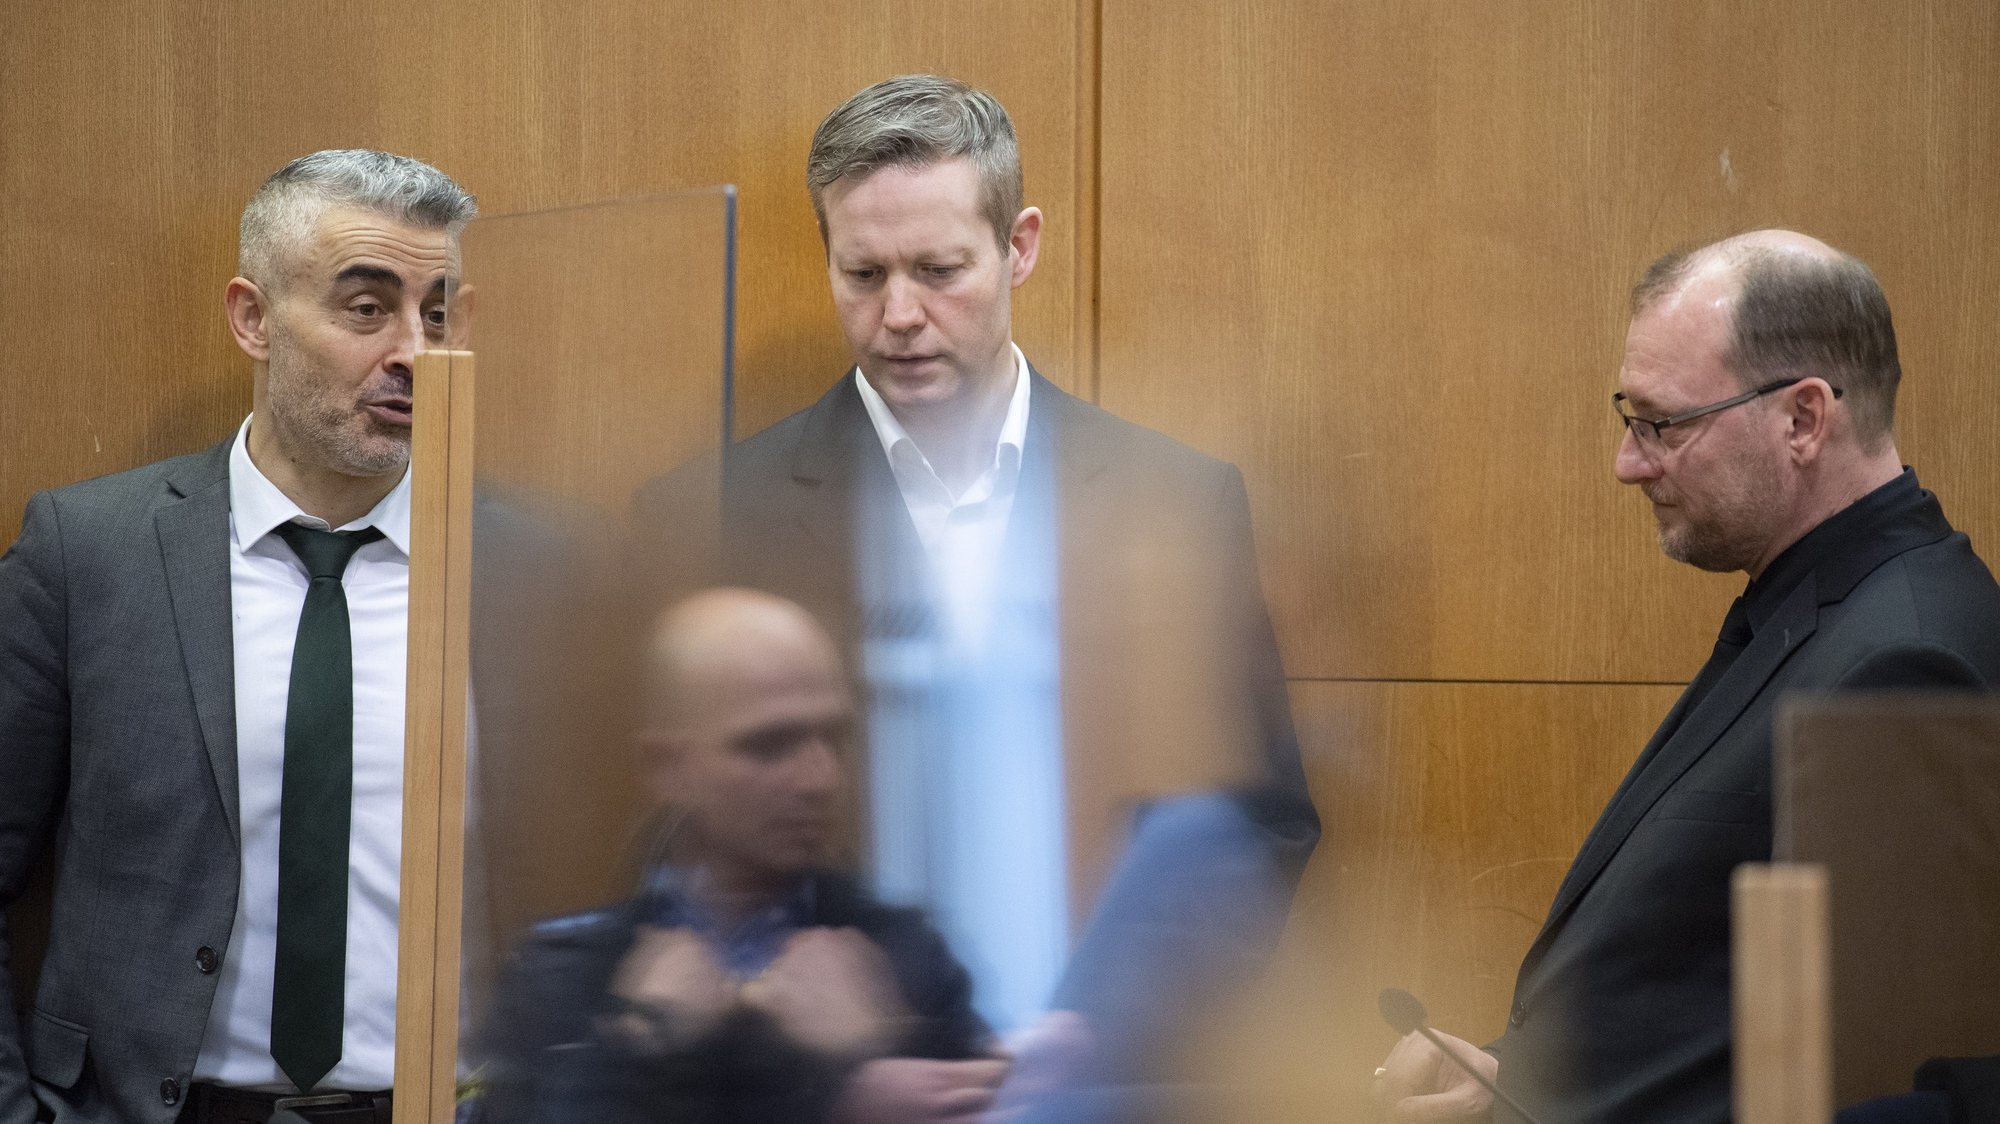 epa08936898 Mustafa Kaplan (L) and Joerg Hardies (R), defence lawyers of the main accused Stephan Ernst (C), wait for the continuation of the trial against Stephan Ernst, accused of murdering politician Walter Luebcke, at the Higher Regional Court in Frankfurt am Main, Germany, 14 January 2021. Main defendant Stephan Ernst, who has a history of right-wing extremism, is accused of shooting Walter Luebcke, a politician of the German Christian Democrats (CDU) in the state of Hesse who had been outspoken in his support of refugees.  EPA/BORIS ROESSLER / POOL